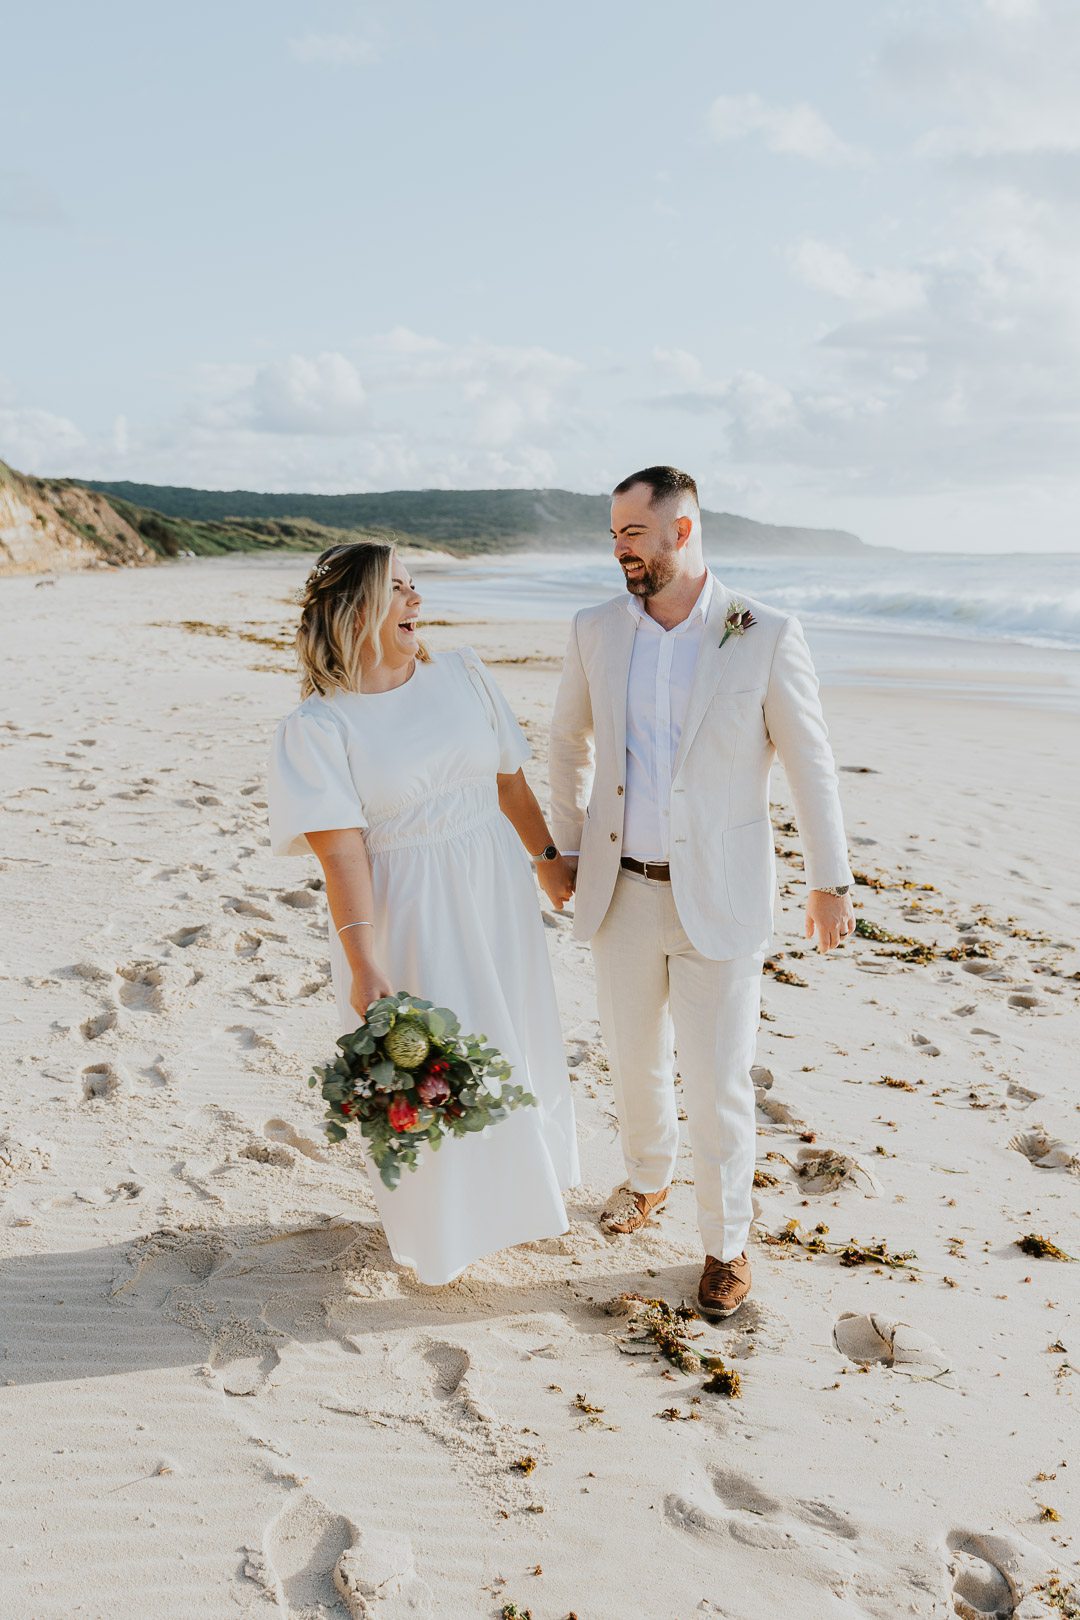 Sunrise Beach Elopement Photography Sydney. A happy and relaxed looking couple wander down the beach laughing on their Elopement Wedding. The image is colouful, fresh and fun.